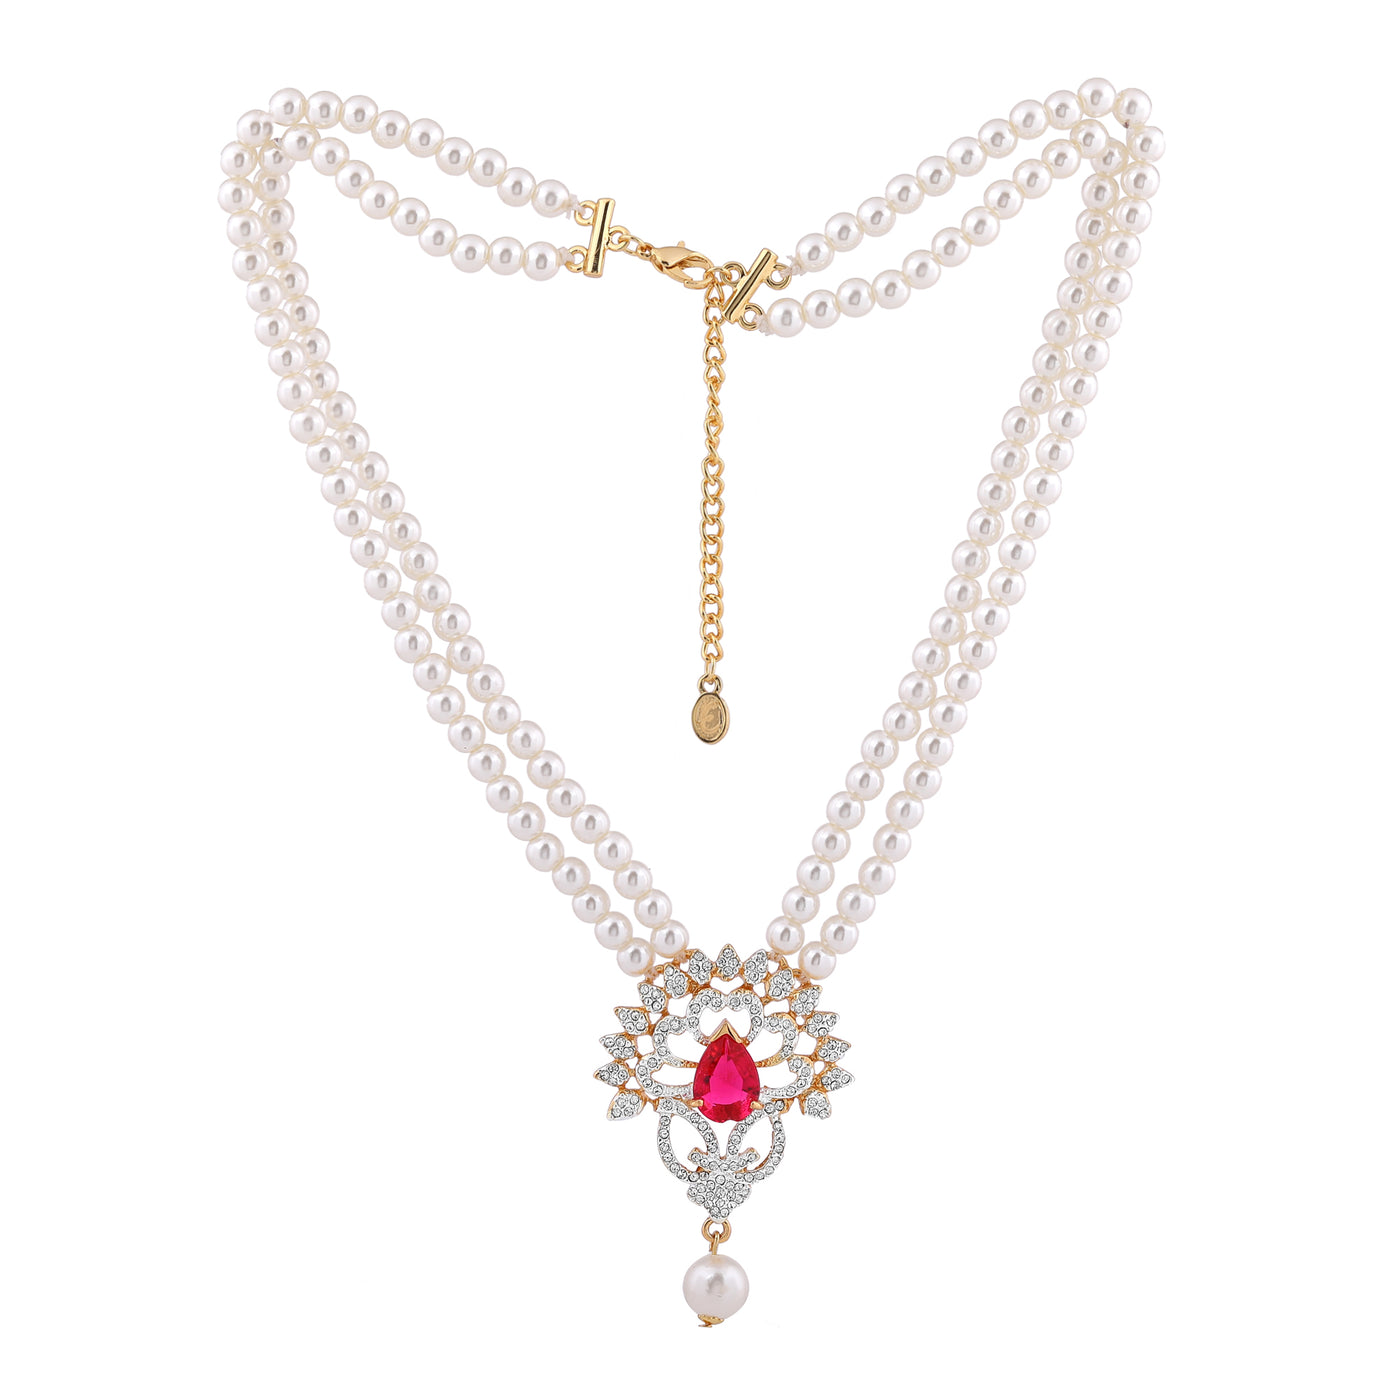 Estele Gold Plated Charming Pearls Necklace Set with Ruby Stones for Women